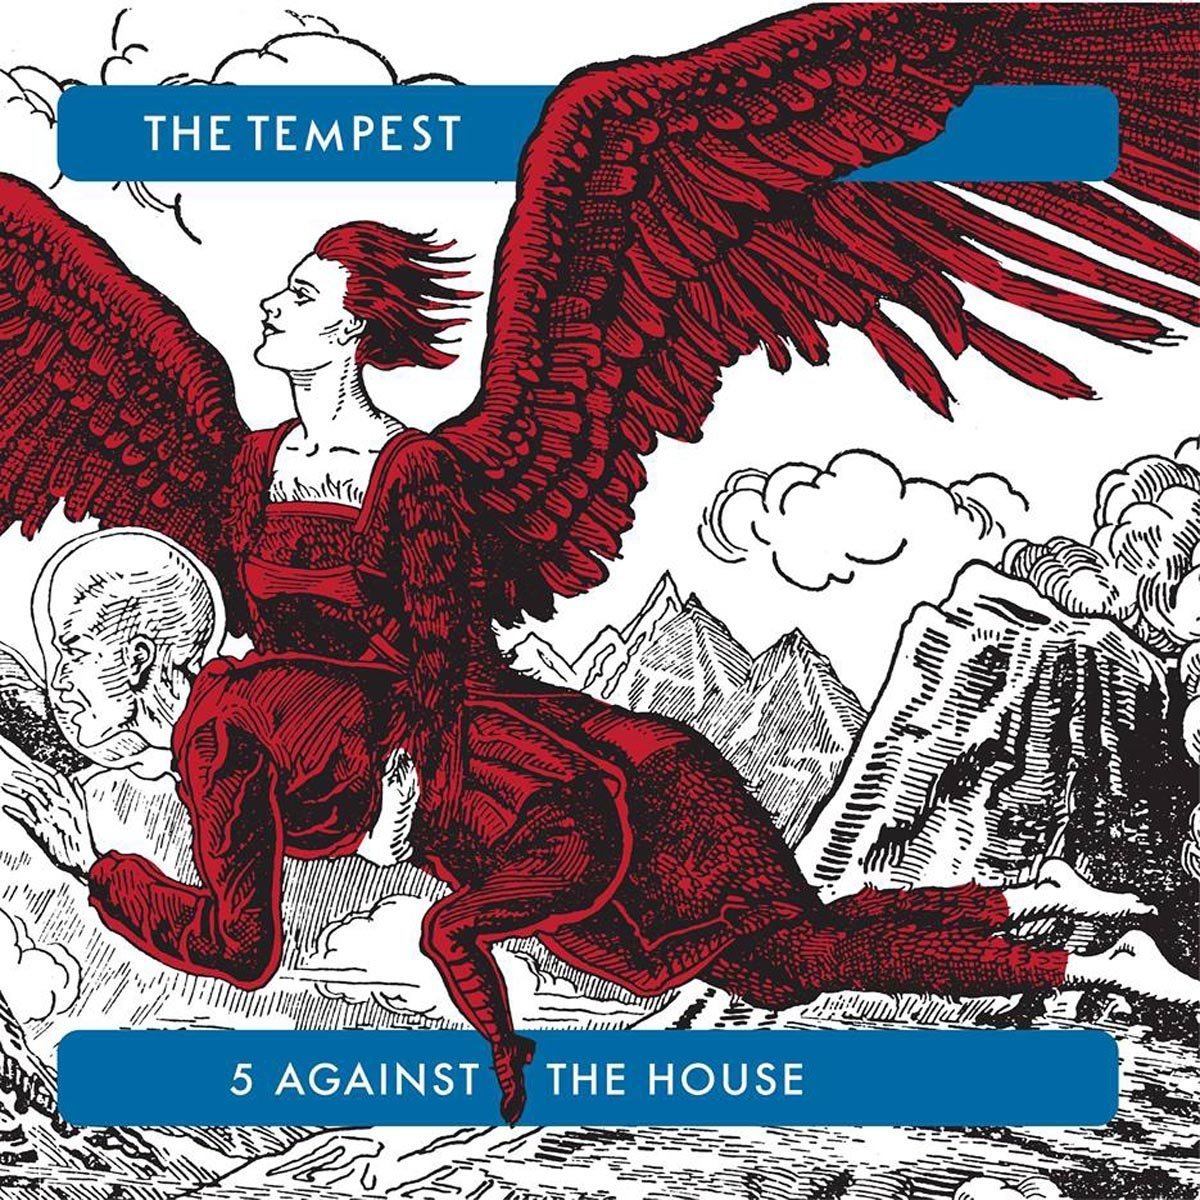 The Tempest - 5 Against The House (Optic Nerve)